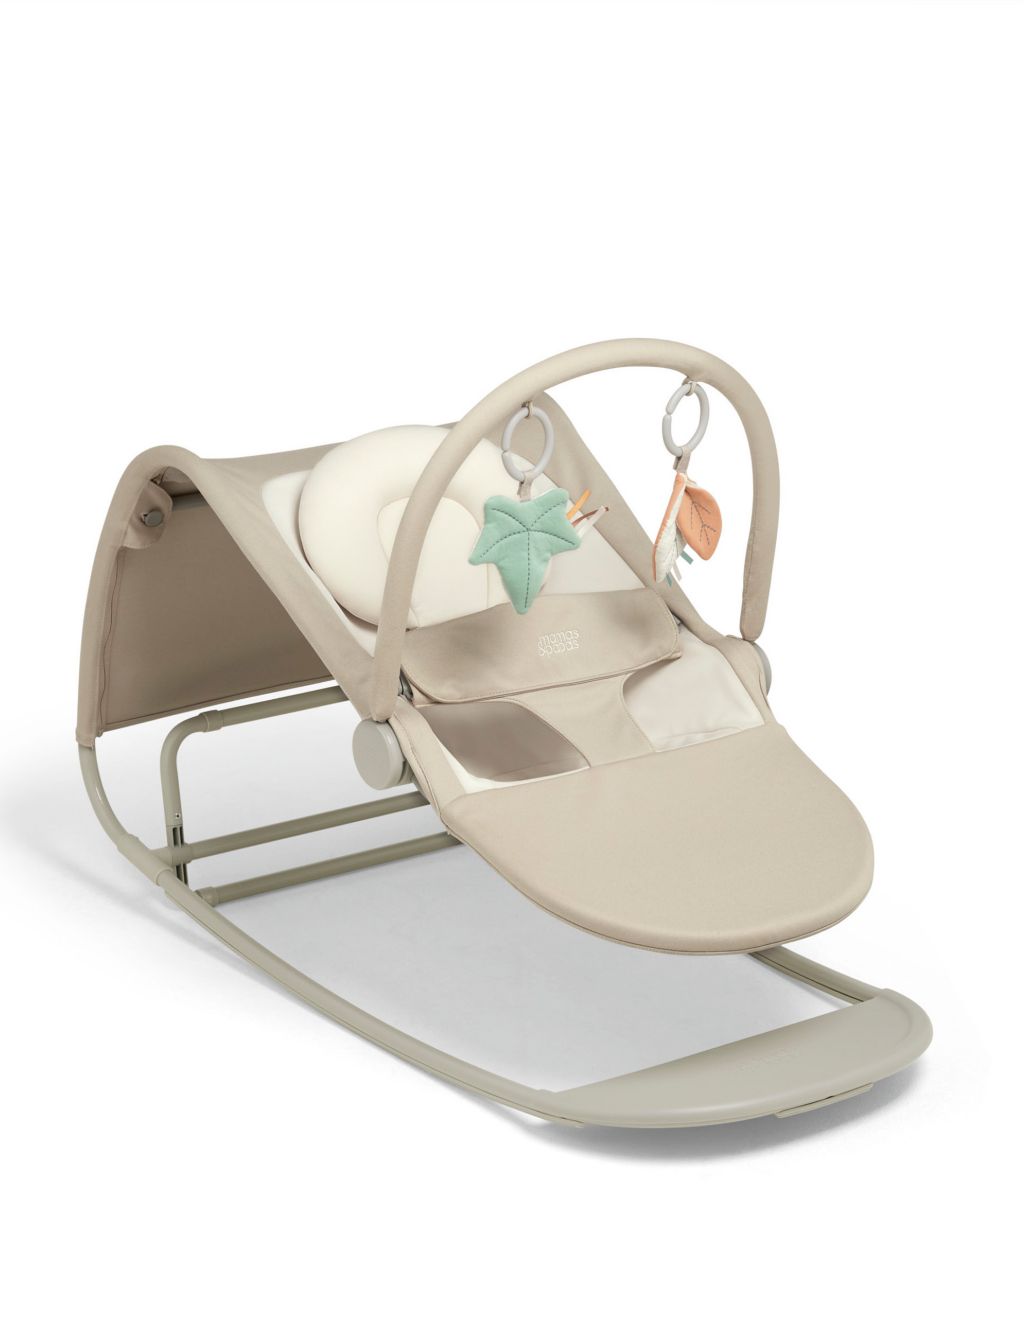 Tempo 3-in-1 Rocker Ivy Bouncer image 4